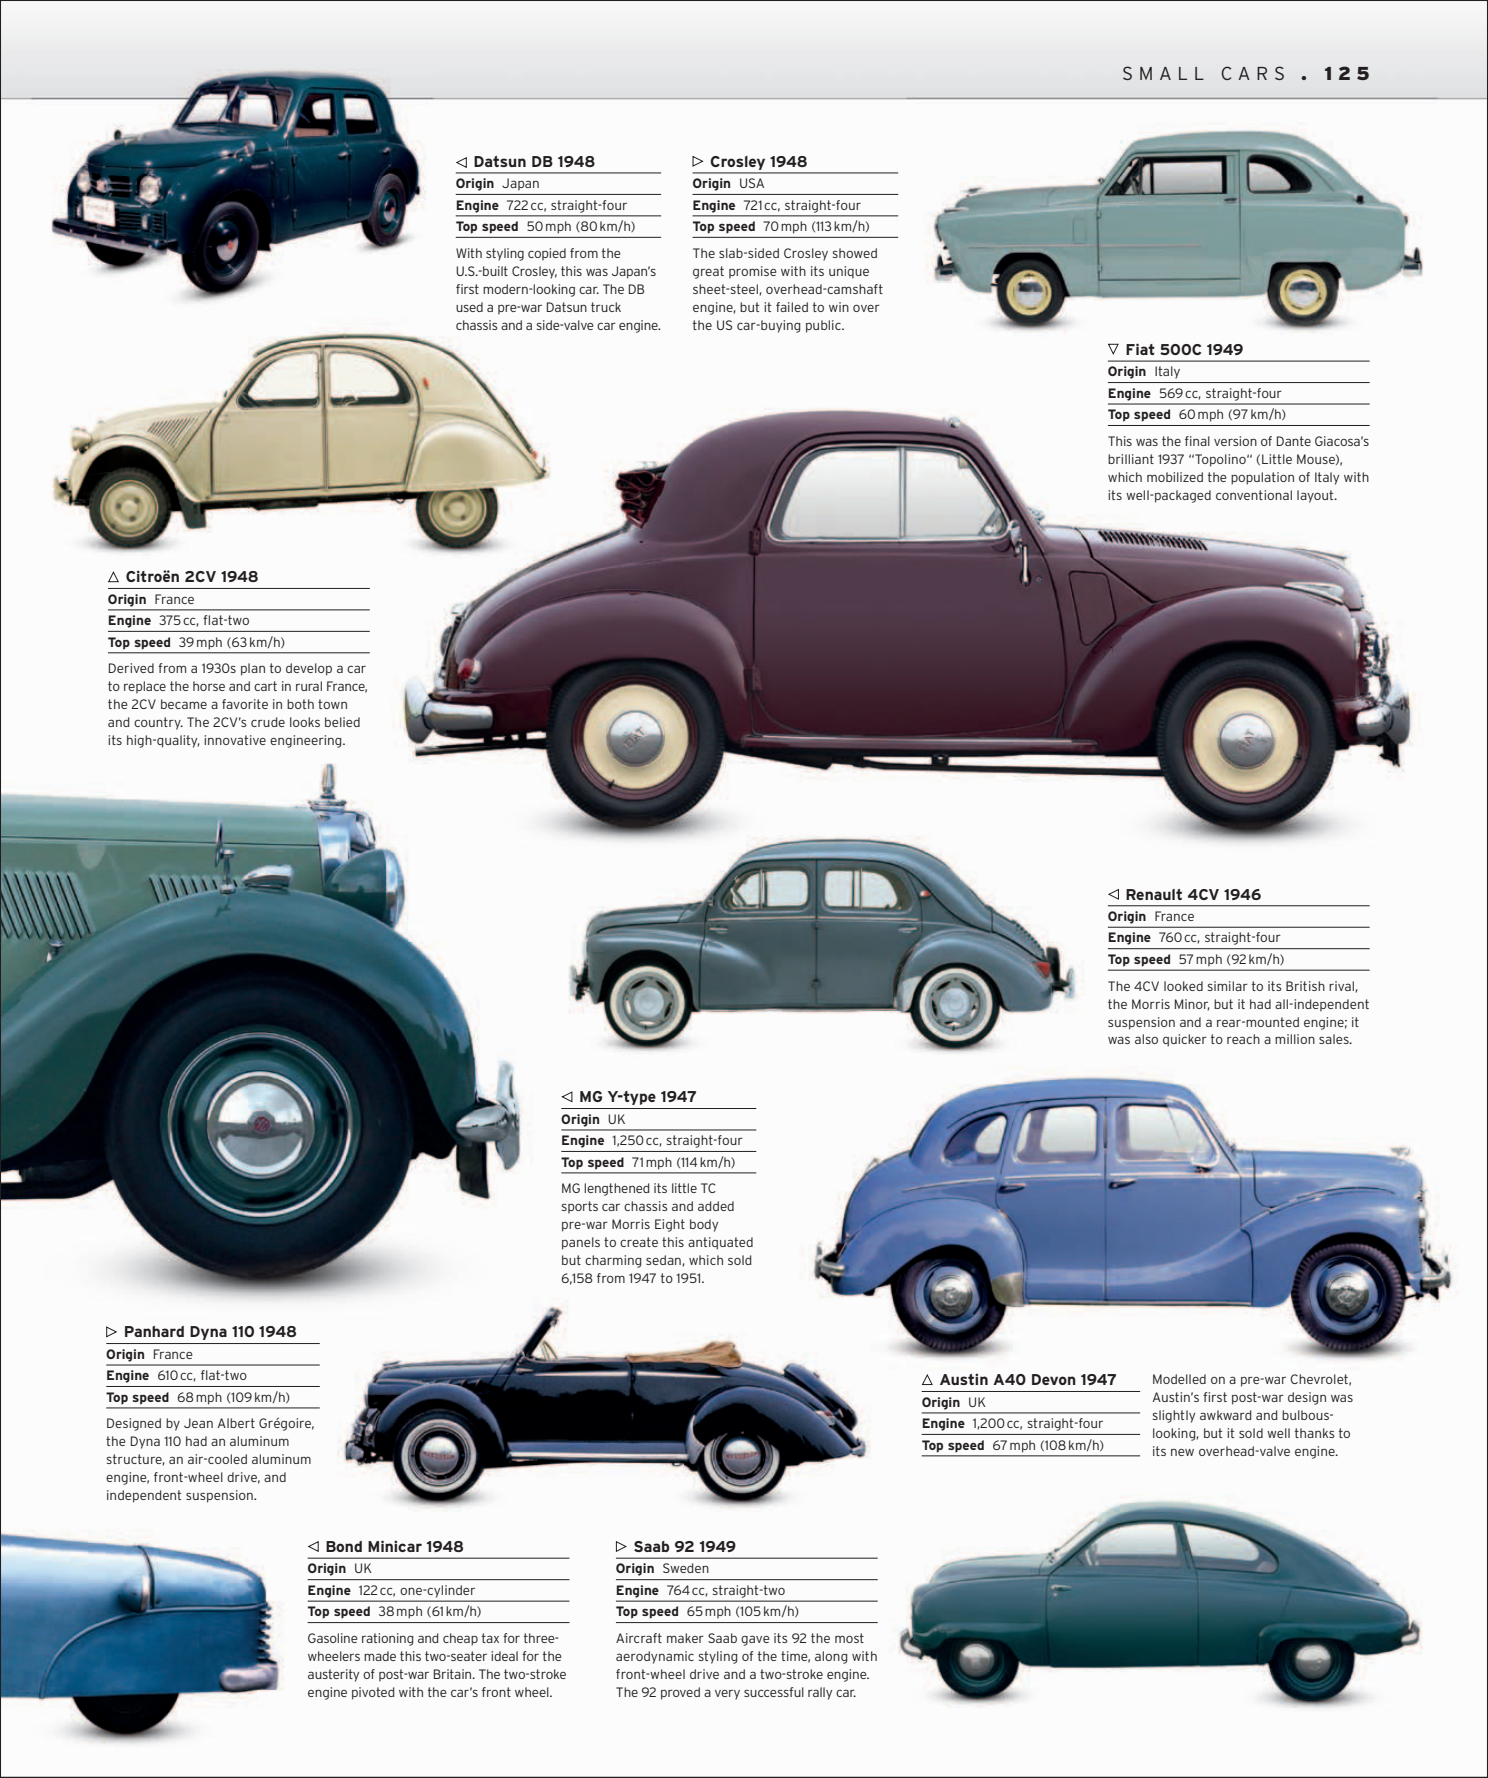 Car%20-%20The%20Definitive%20Visual%20History%20of%20the%20Automobile_127.png